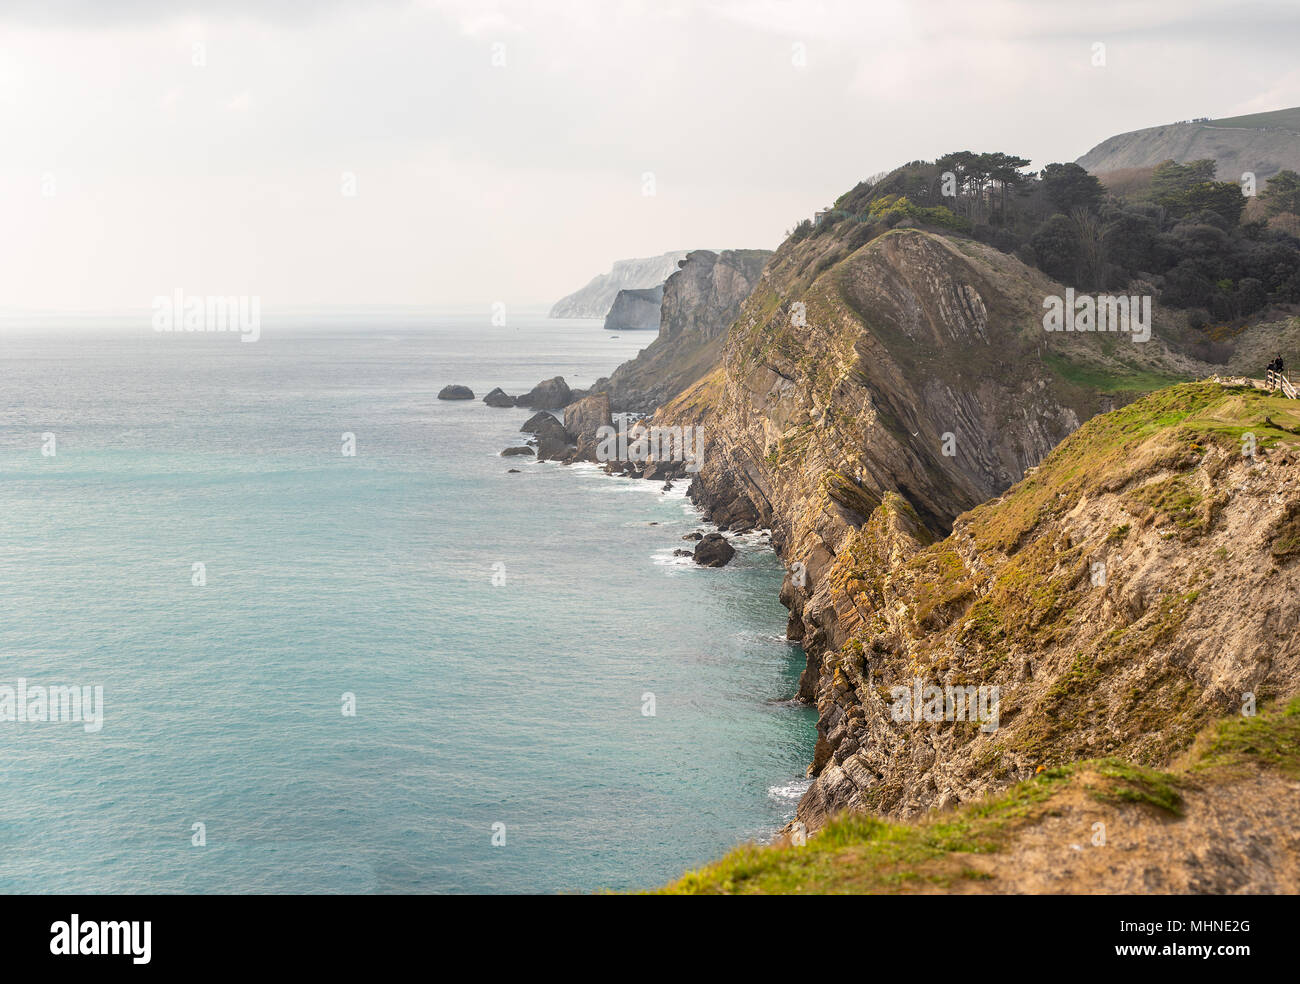 View of the shear sided cliffs along the Jurassic Coast viewed from Lulworth cove to Durdle Door, Dorset, South England. Stock Photo